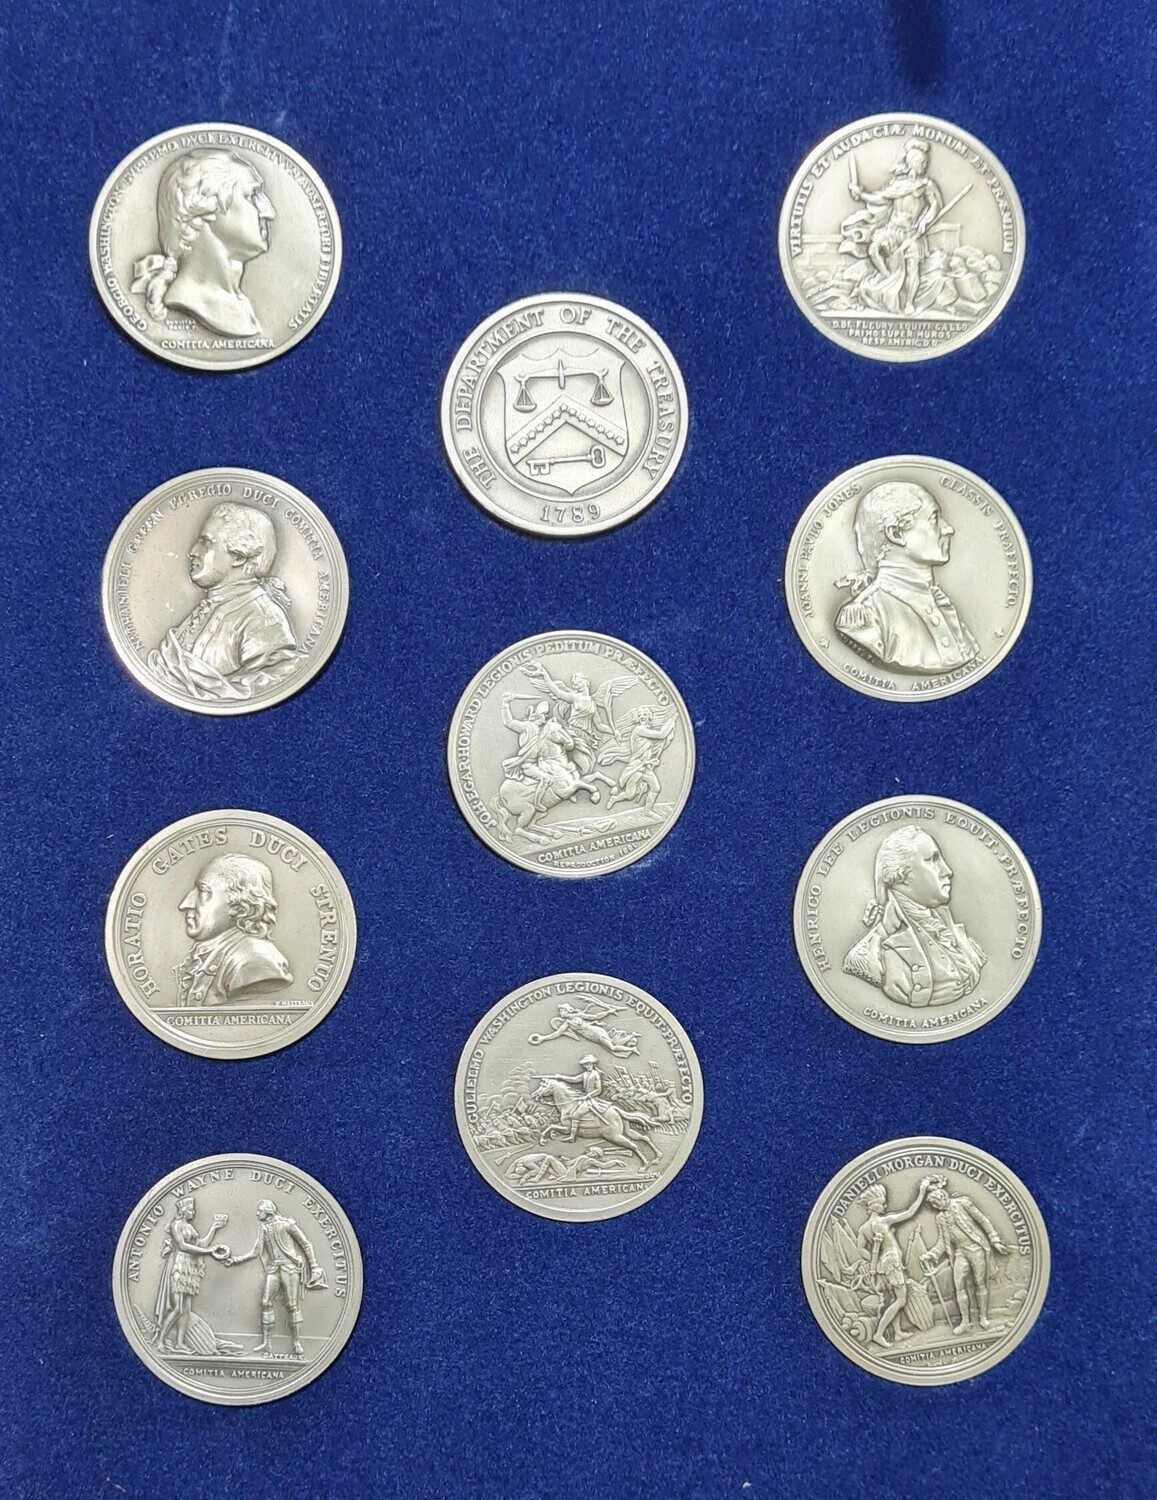 US MINT AMERICA'S FIRST MEDALS COMMEMORATING BATTLES OF THE AMERICAN REVOLUTION